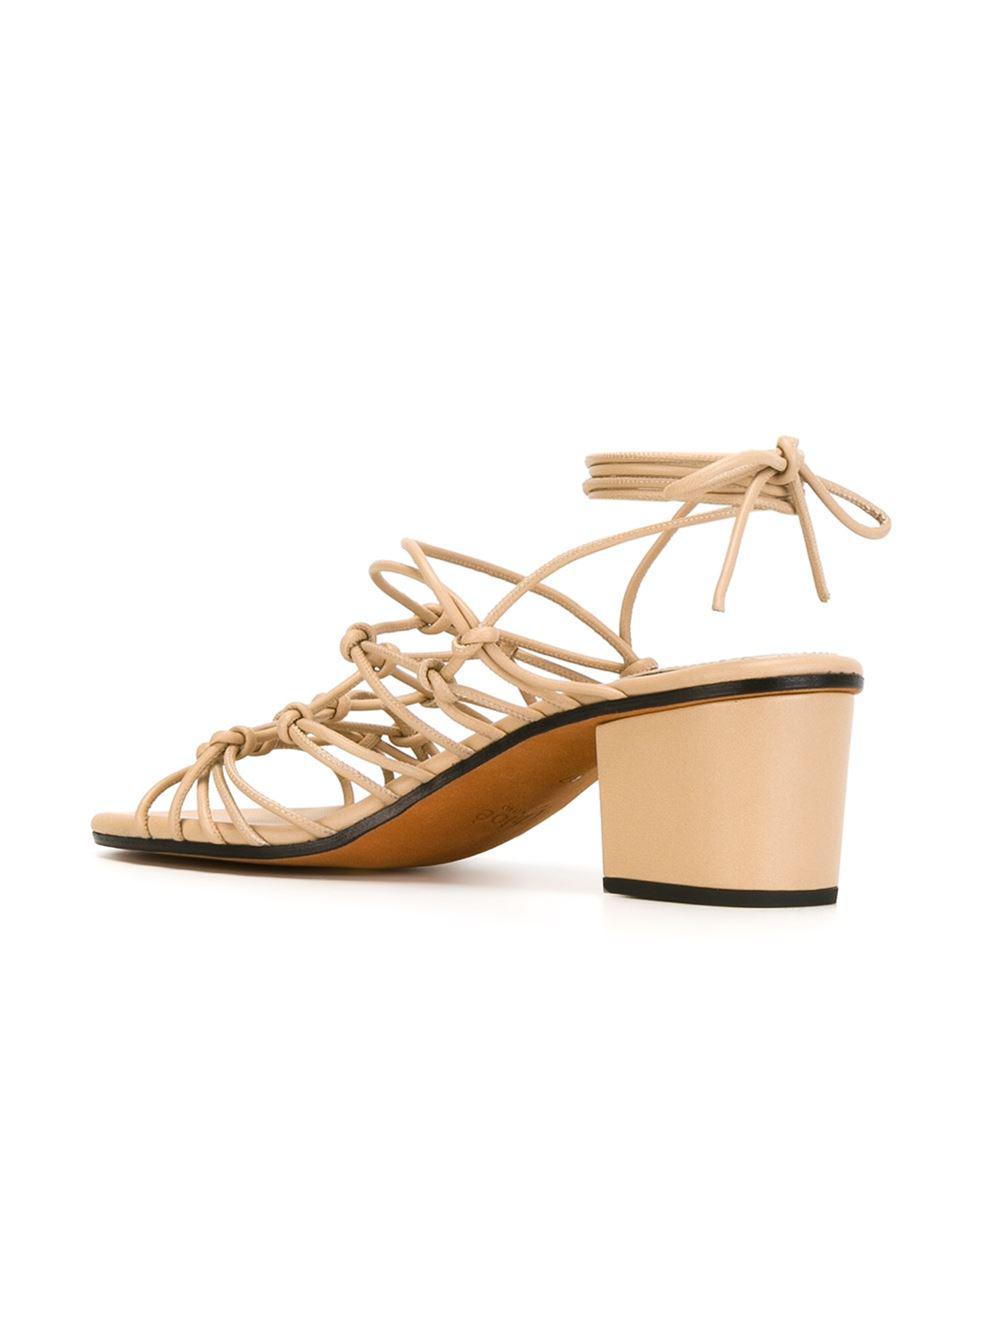 Dolce Vita Wedges Illa Open Toe in Nude Suede (Natural) - Lyst